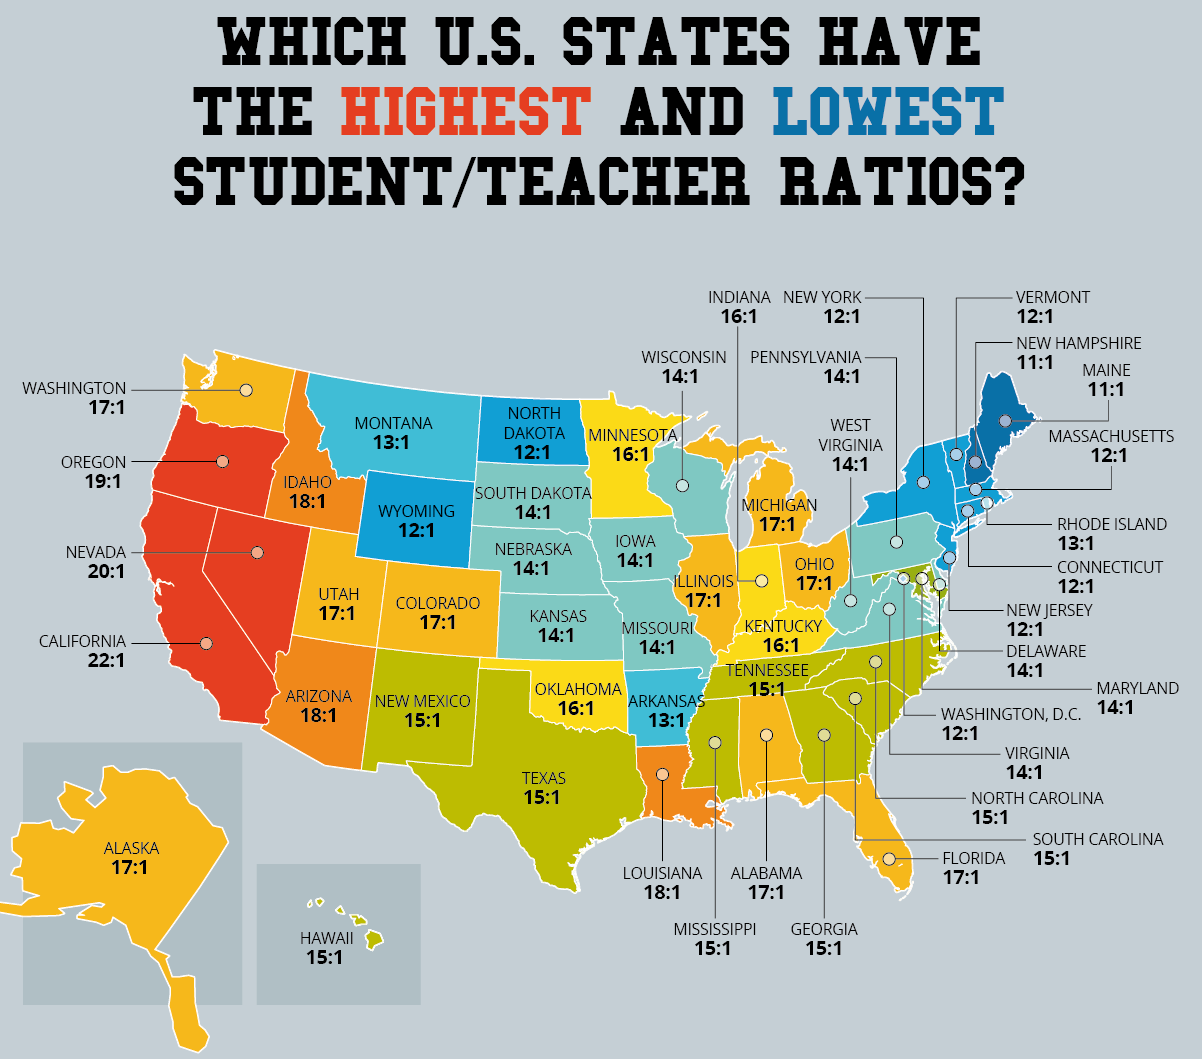 special education teacher to student ratio